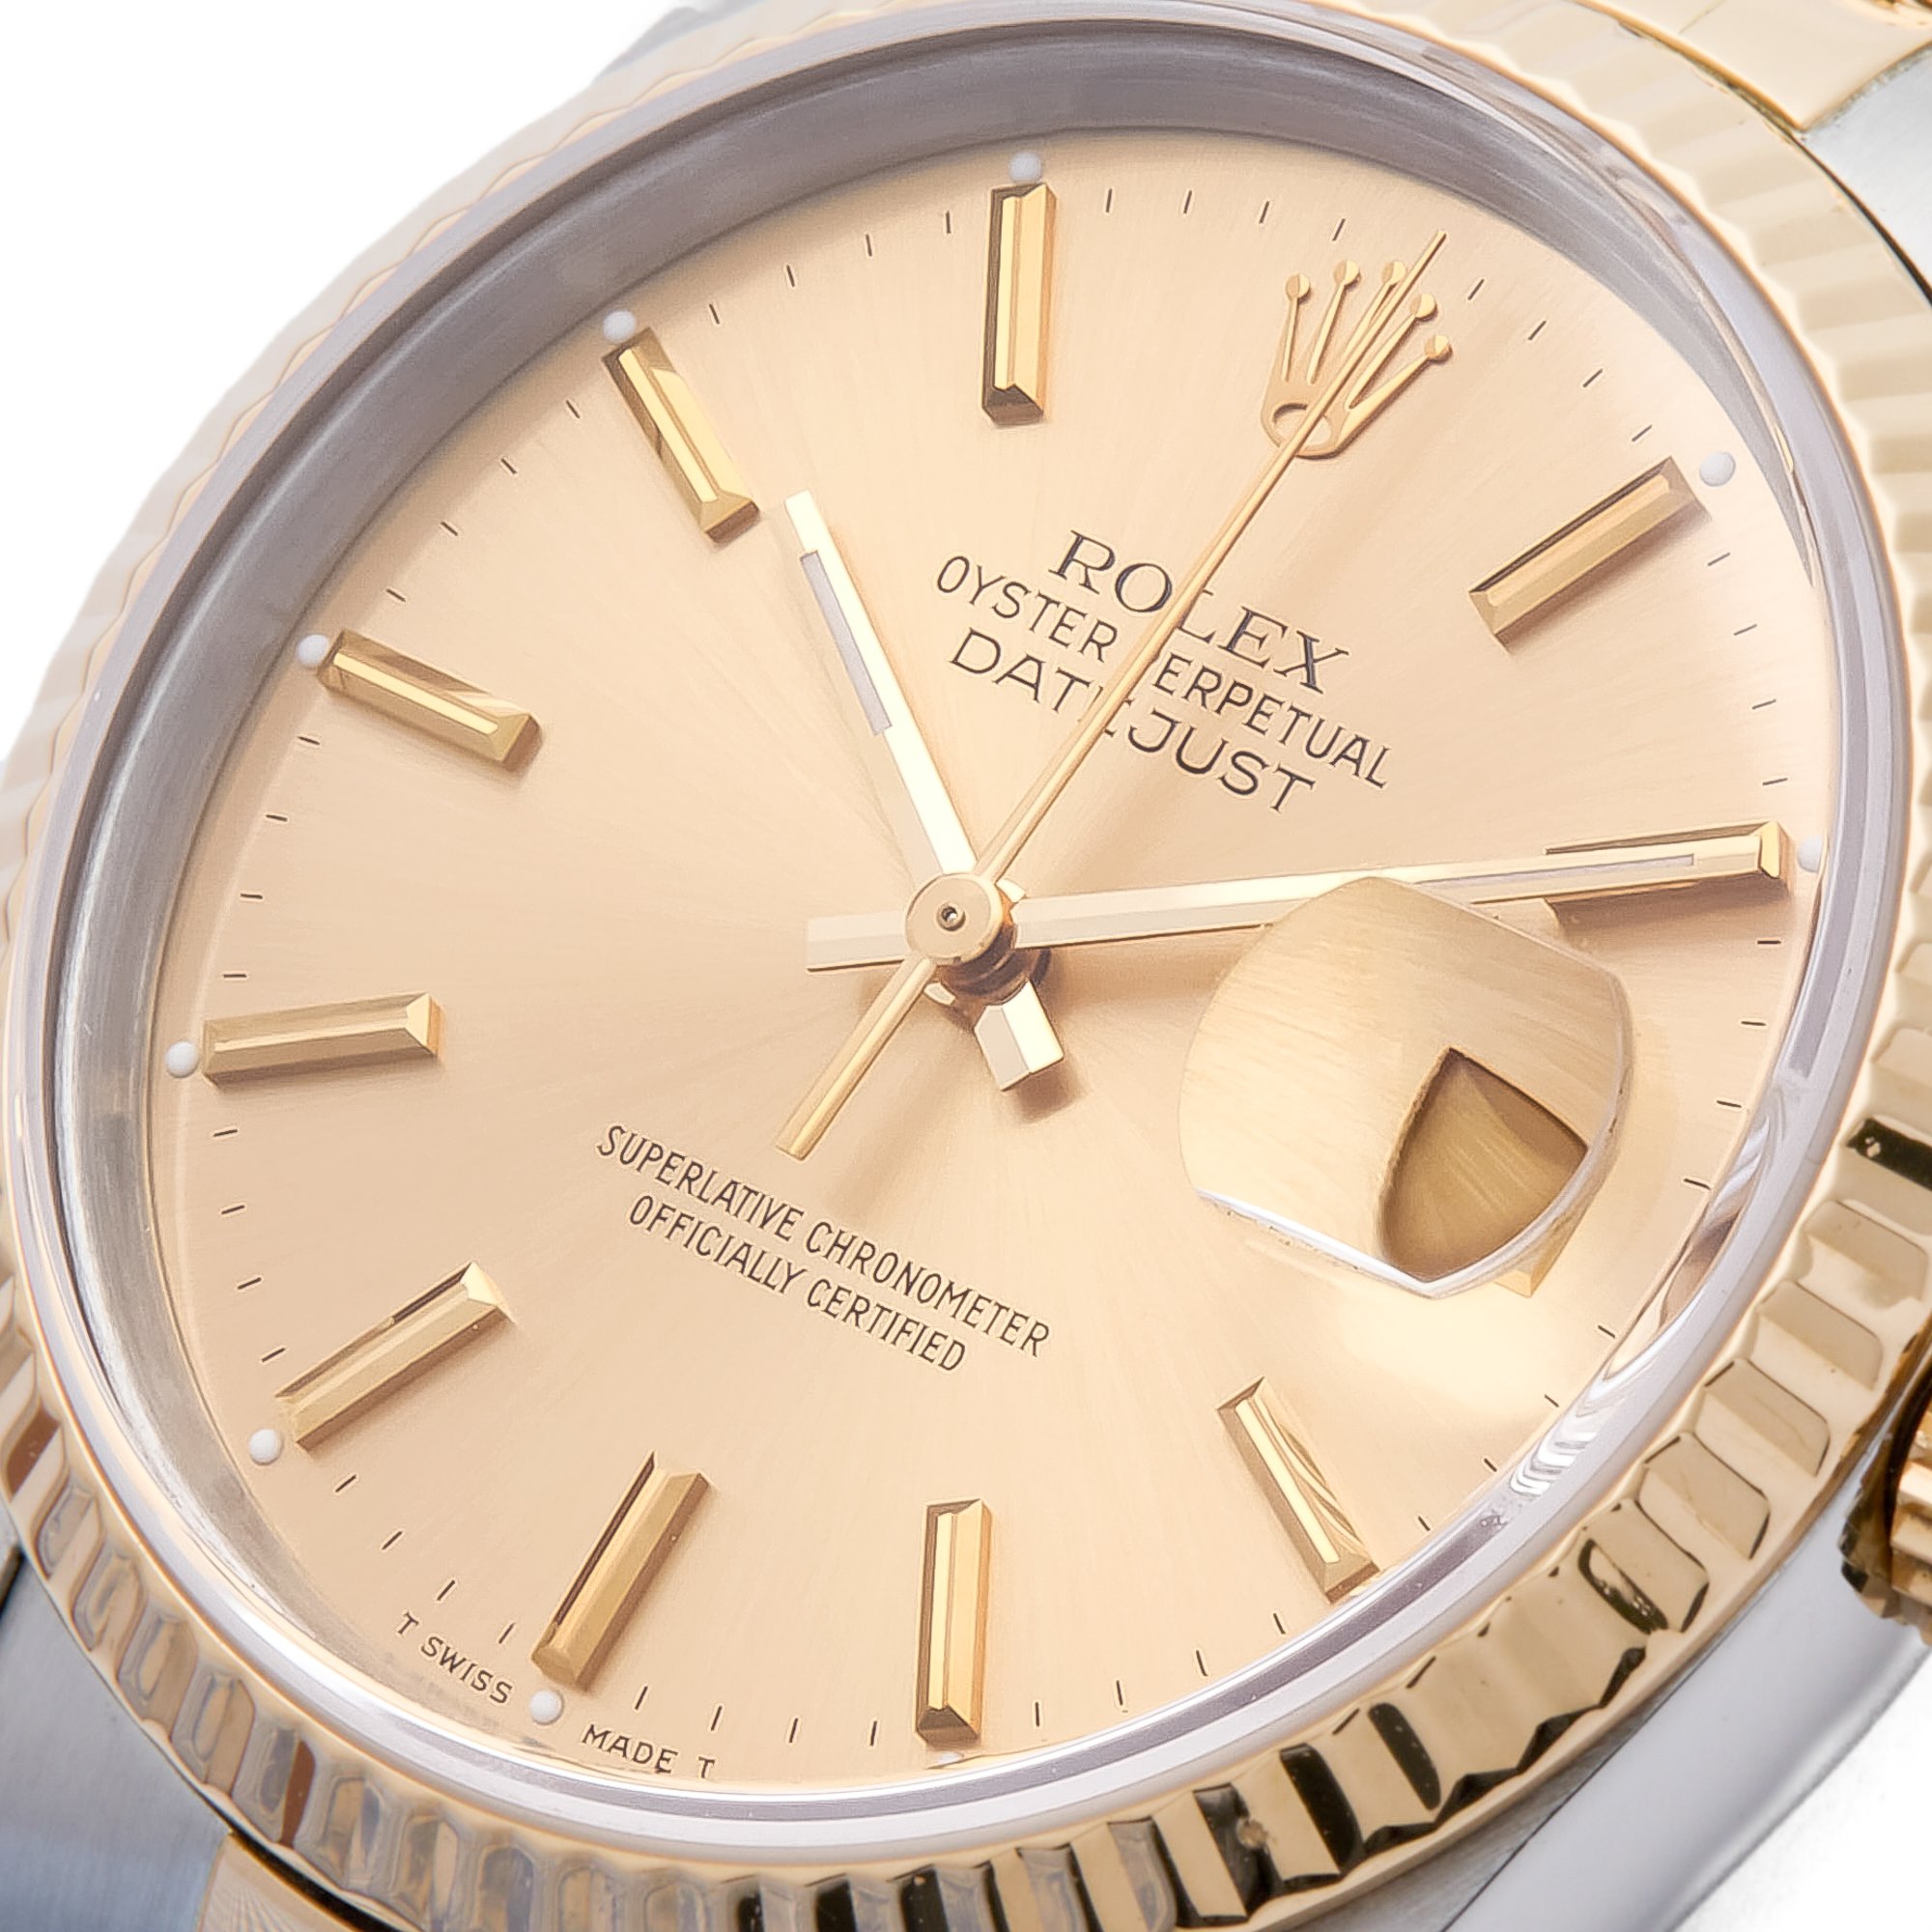 Rolex Datejust 36 Yellow Gold & Stainless Steel 16233